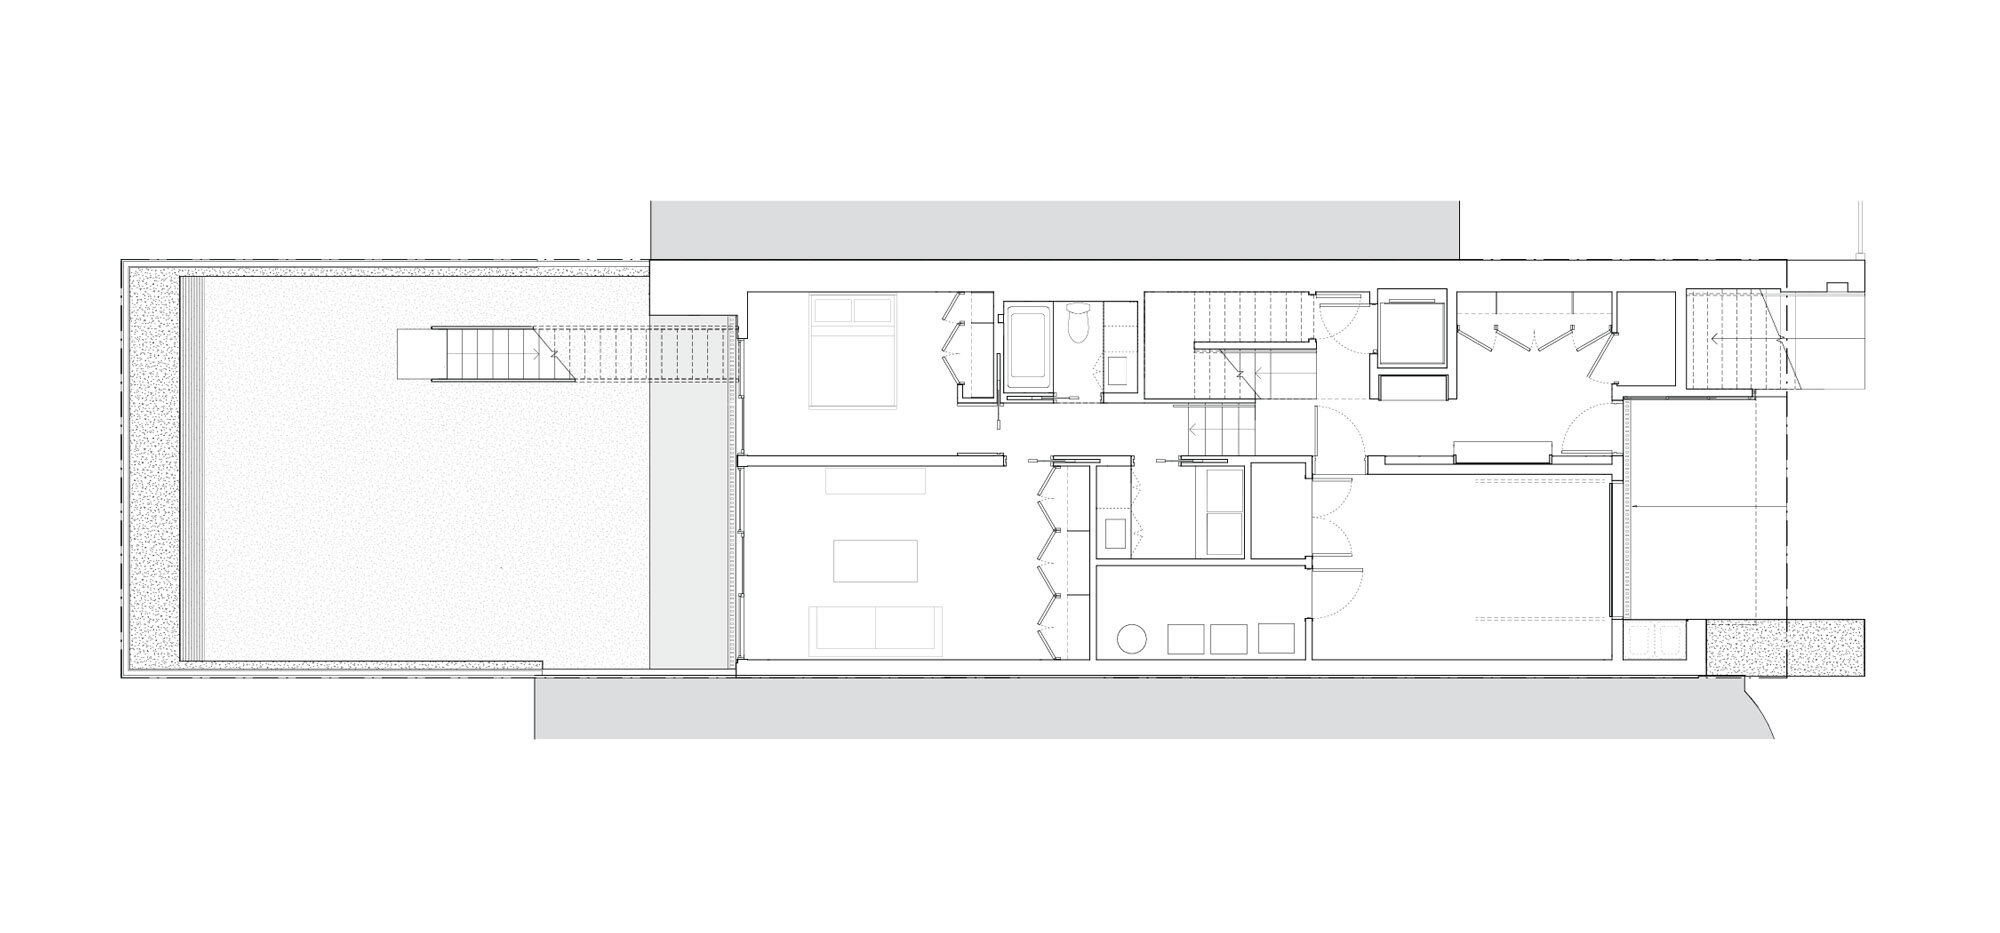 01-res4-re4a-resolution-4-architecture-park-slope-townhouse-brooklyn-modern-home-floor-plan.jpg